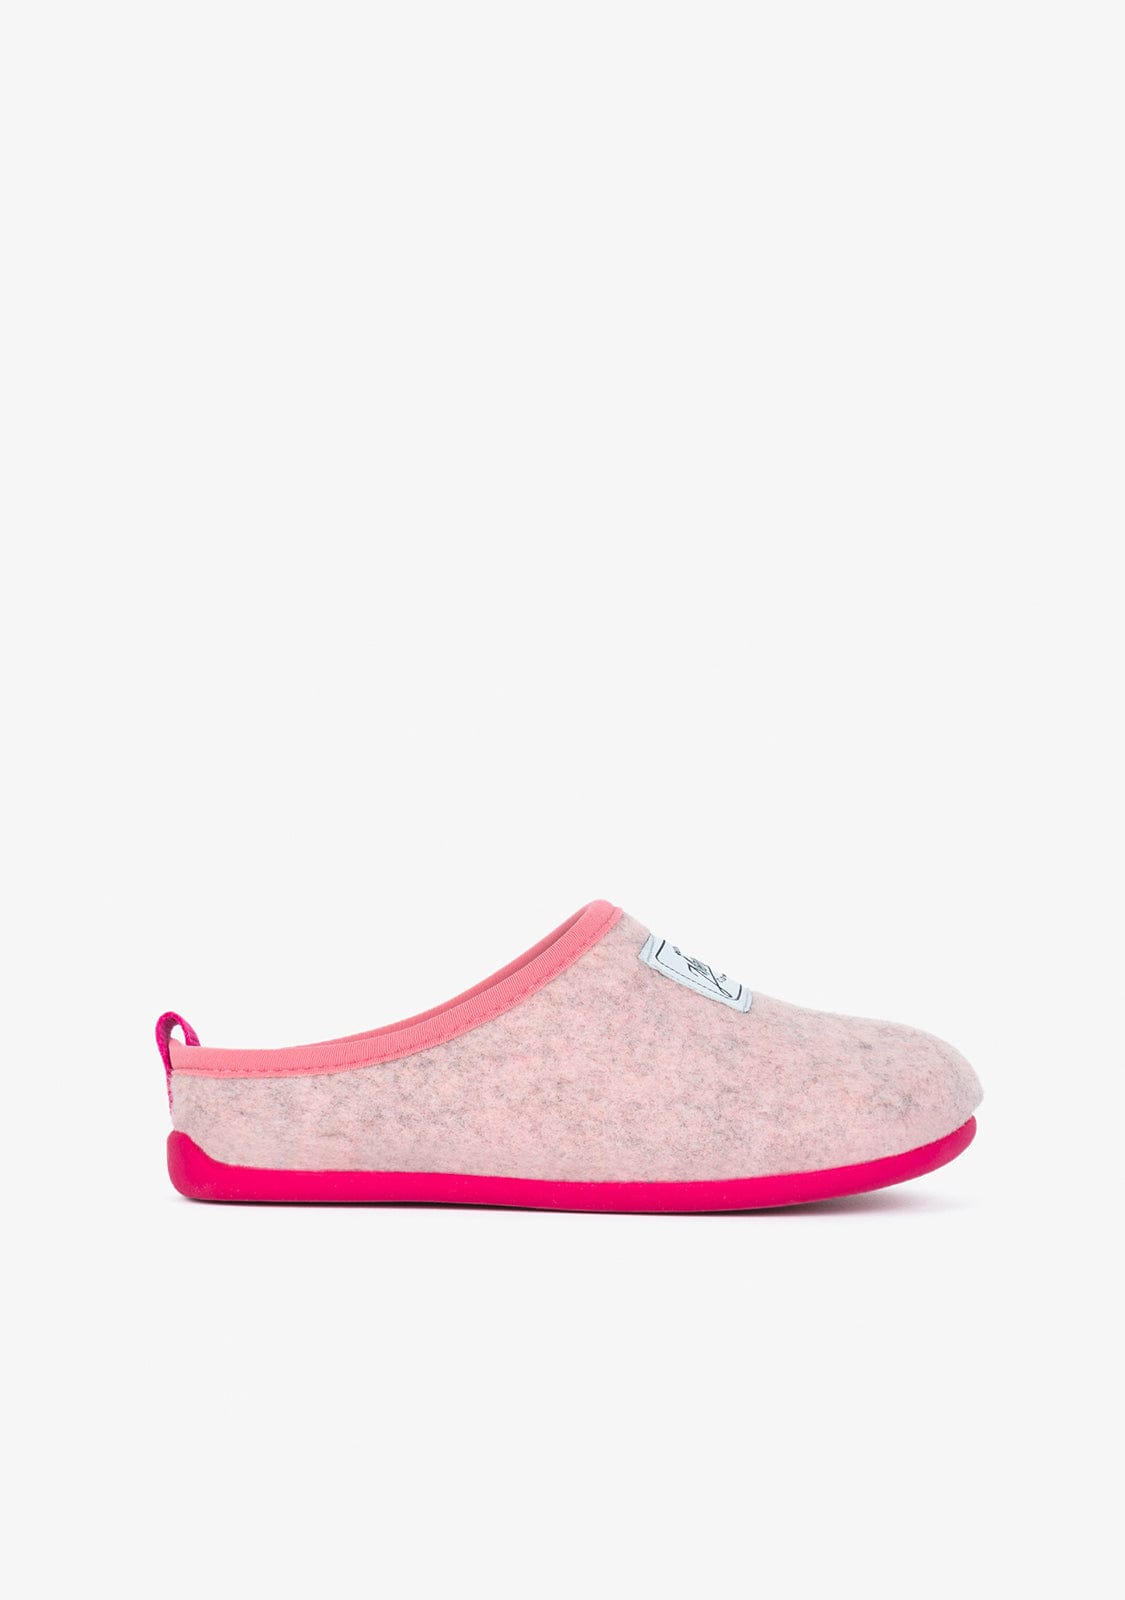 MERCREDY Shoes Pink Ecological Home Slippers